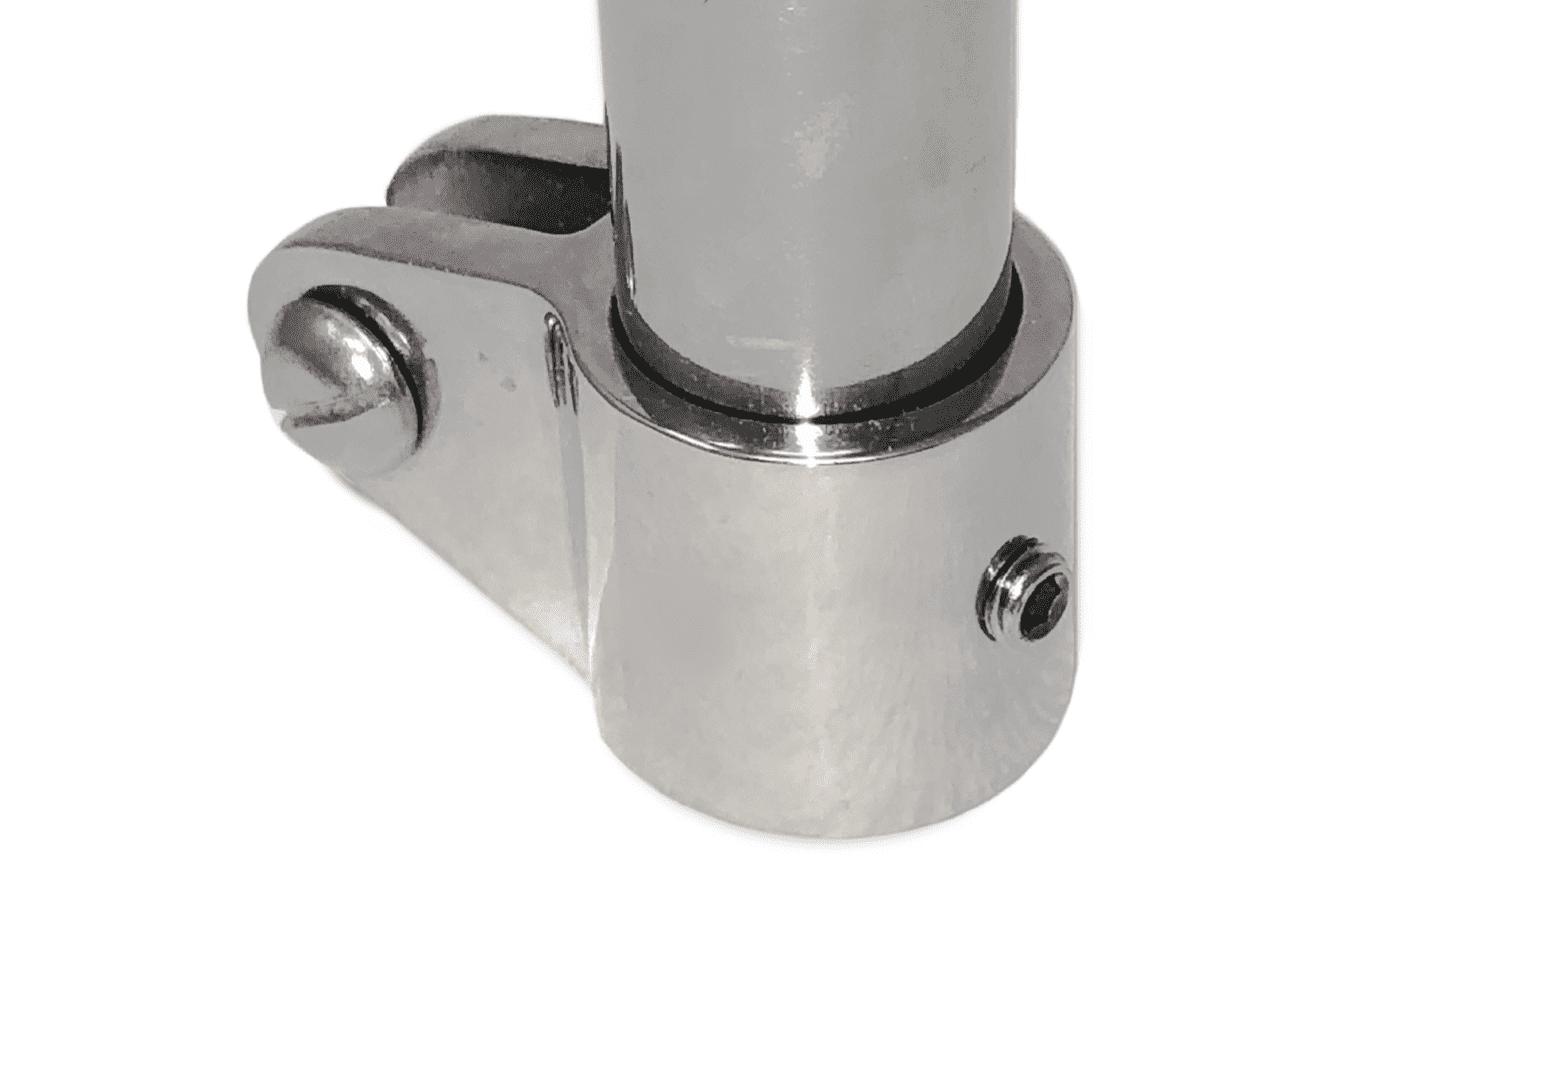 7/8" jaw slide with bolt